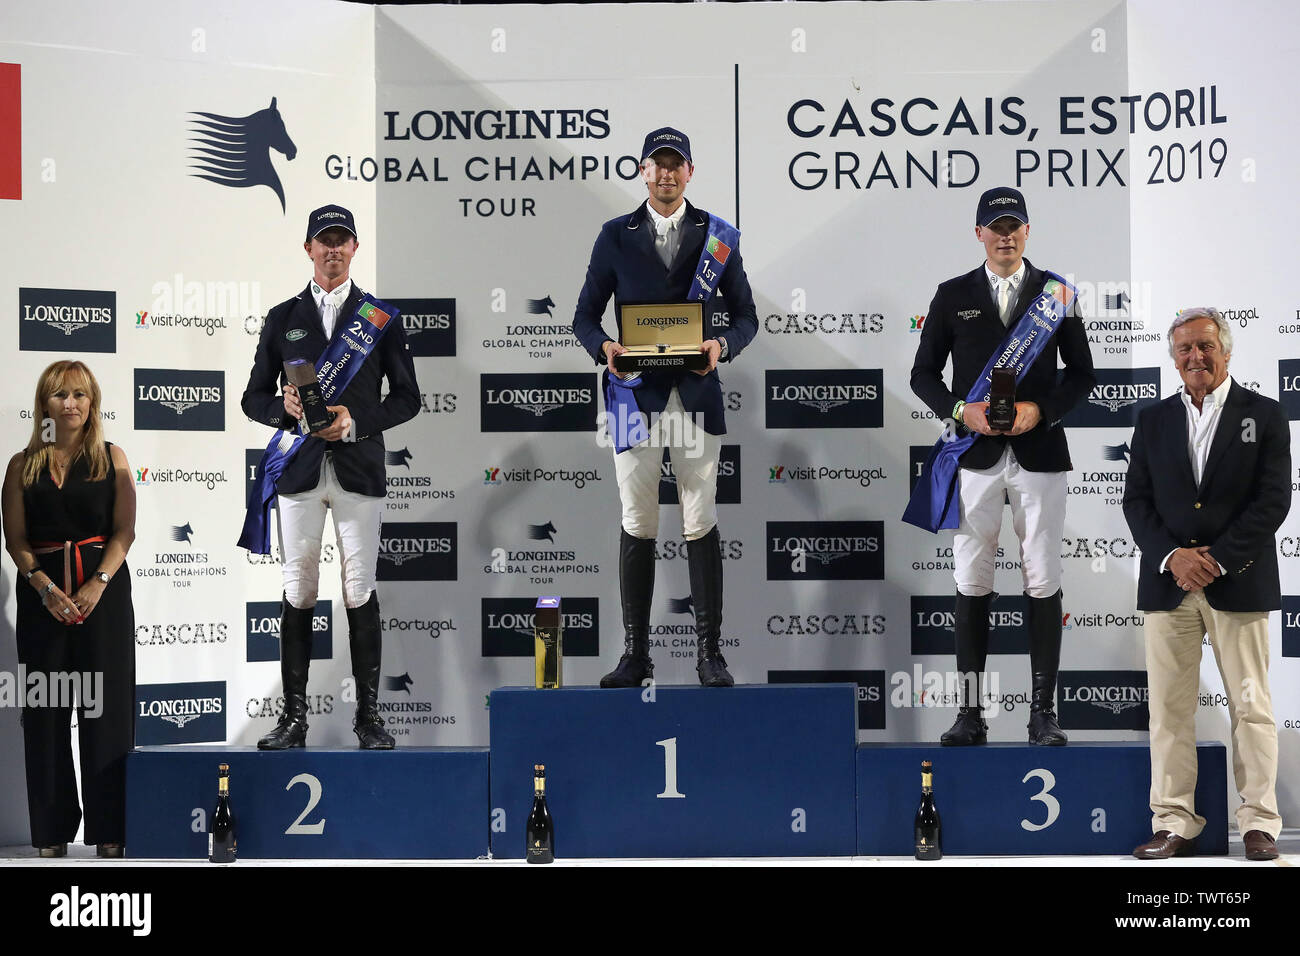 Cascais, Portugal. 22nd June, 2019. Martin Fuchs of Switzerland (C), Ben Maher of United Kingdom (2nd L) and Michael Duffy of Ireland (2nd R) pose on the podium during the awarding ceremony of the Cascais Estoril jumping competition of Longines Global Champions Tour Grand Prix in Cascais, Portugal, on June 22, 2019. Credit: Petro Fiuza/Xinhua/Alamy Live News Stock Photo